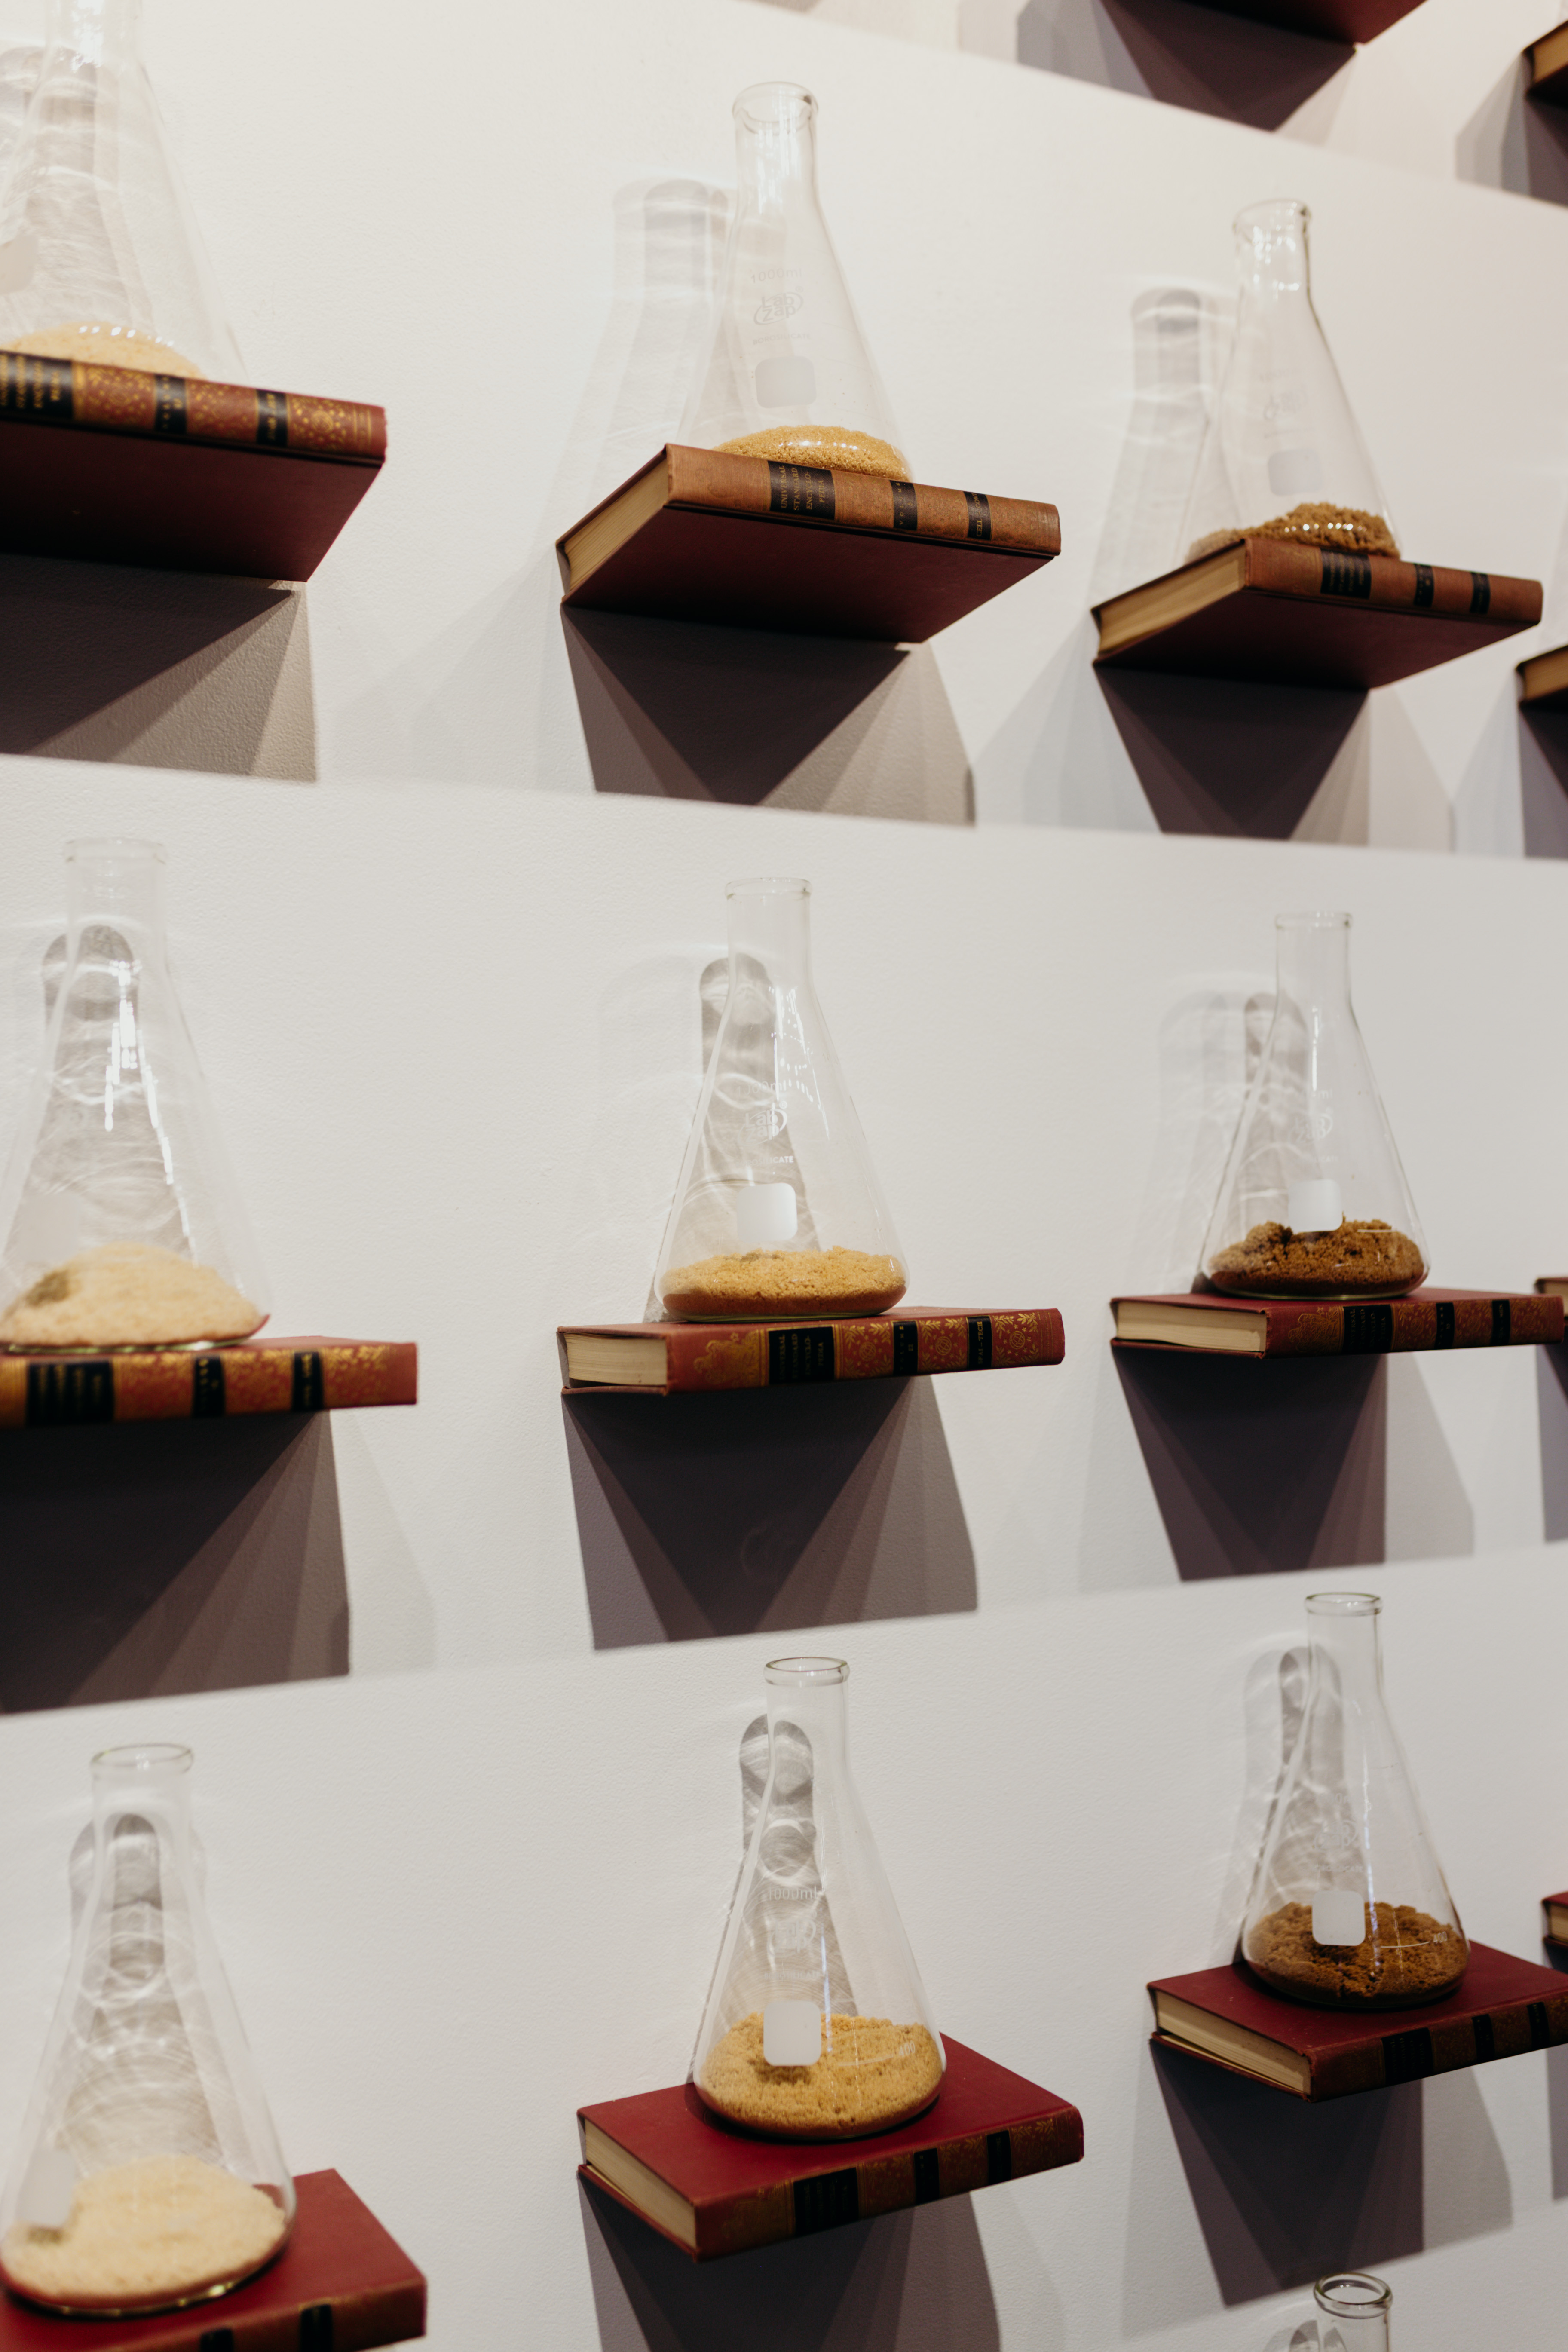 Chemistry beakers rest on red books that hang from the wall. They are filled with various sand-like substances